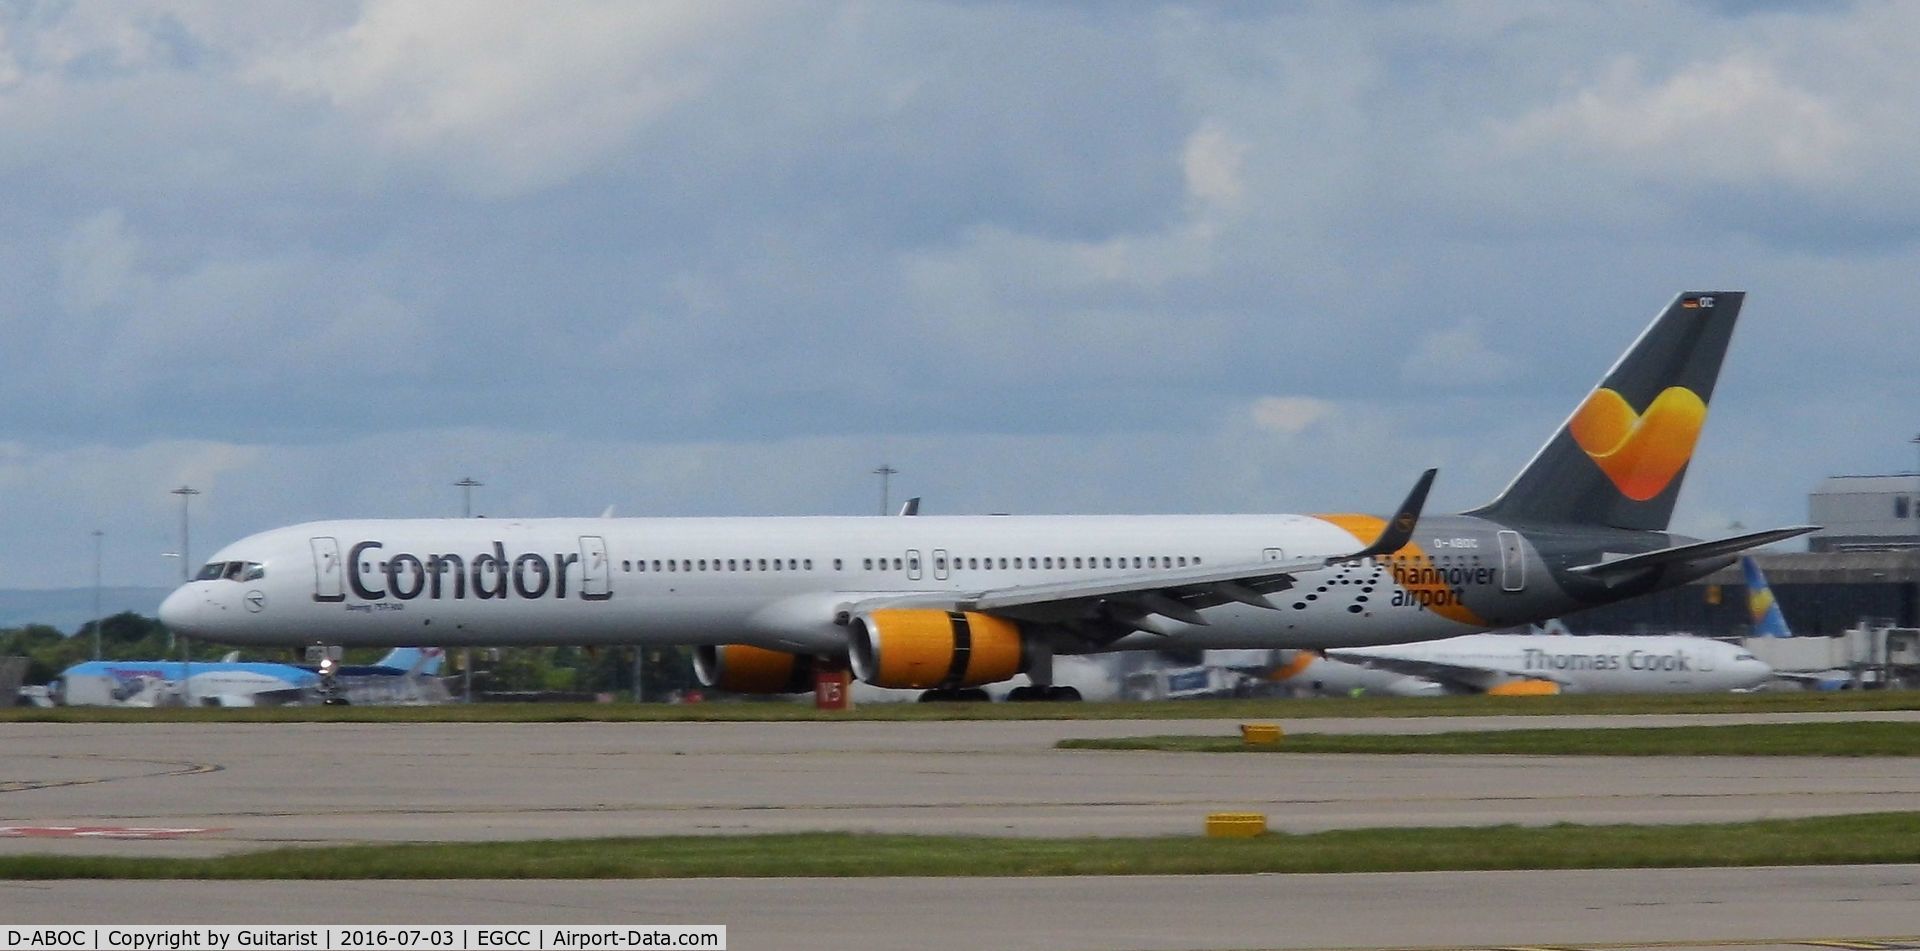 D-ABOC, 1998 Boeing 757-330 C/N 29015, At Manchester